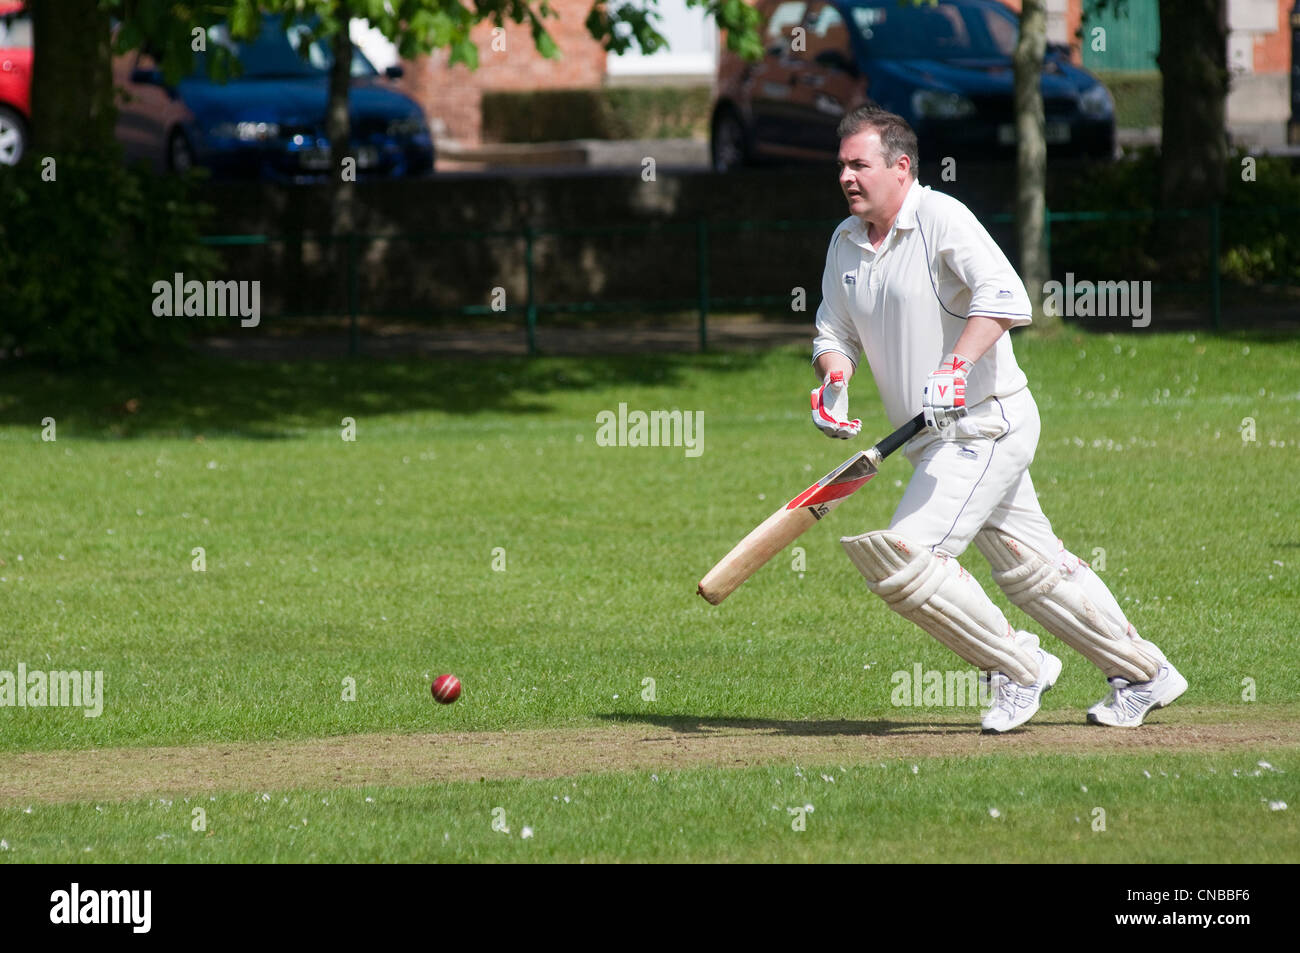 United Kingdom, Northern Ireland, Armagh county, Armagh, players of cricket Stock Photo